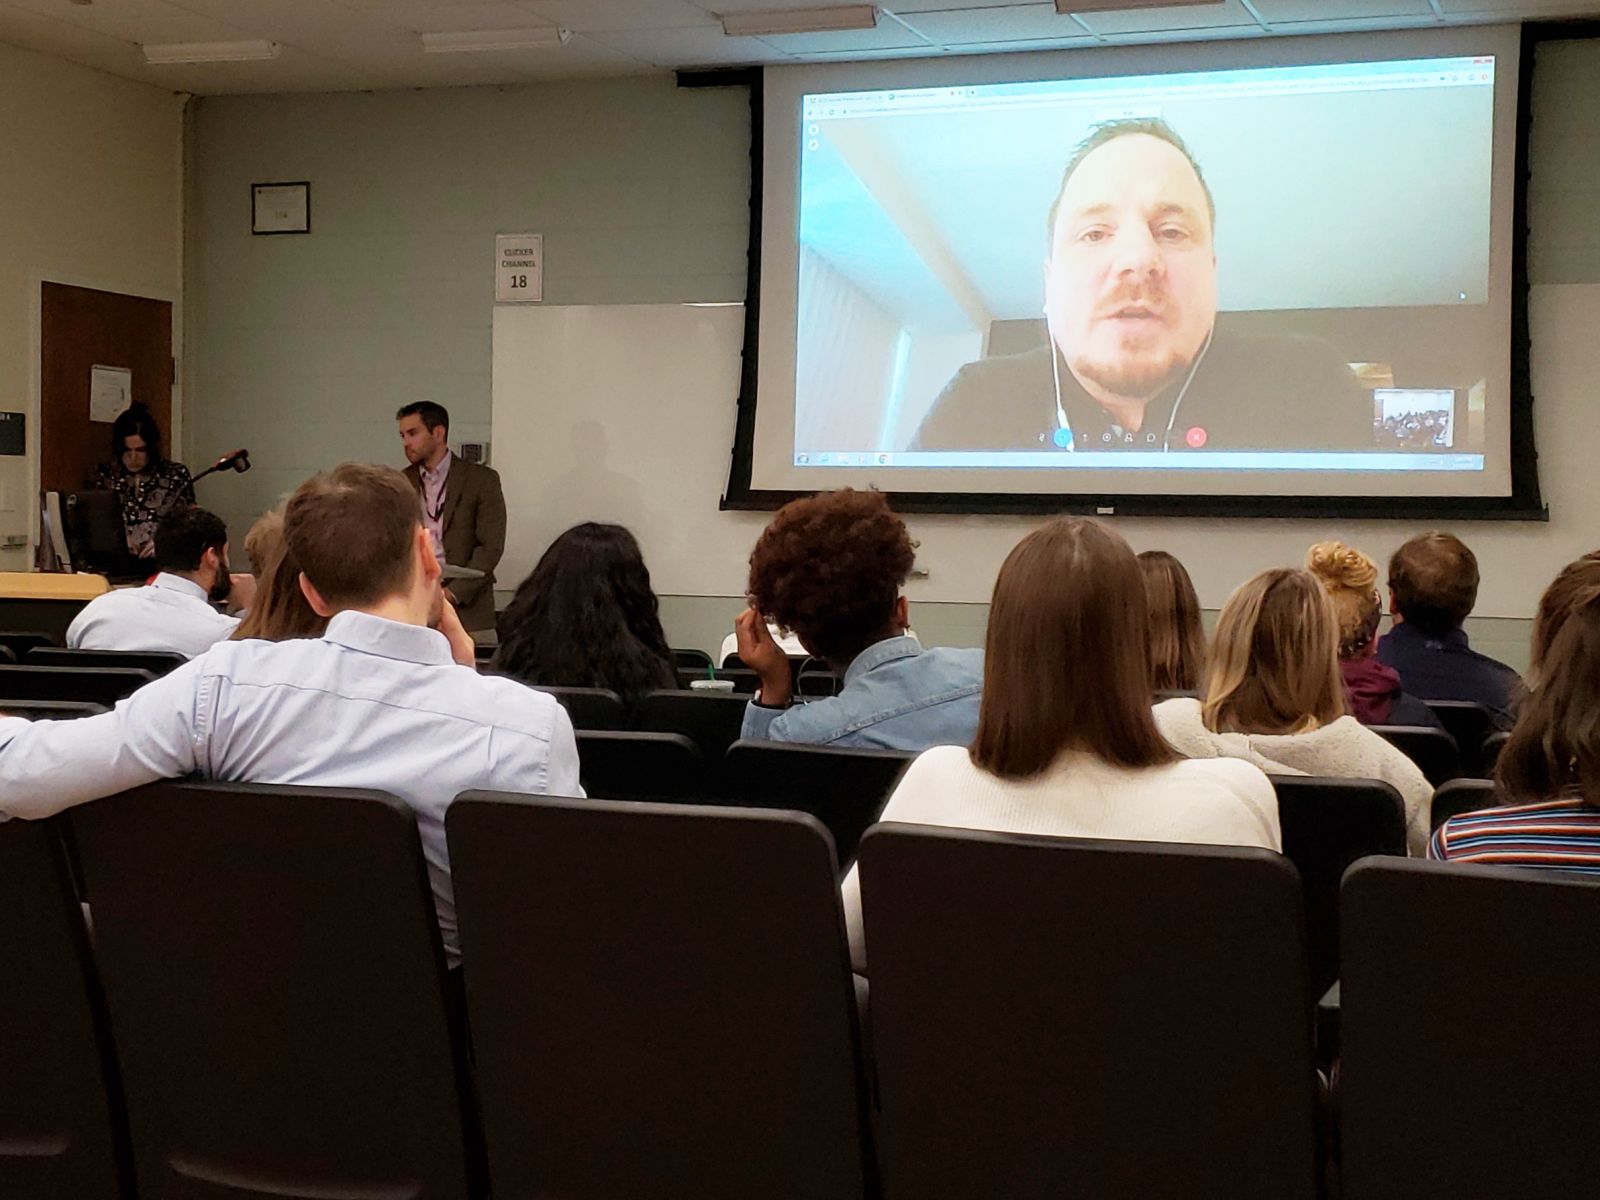 Brad Galloway delivers a remote lecture to START students and researchers